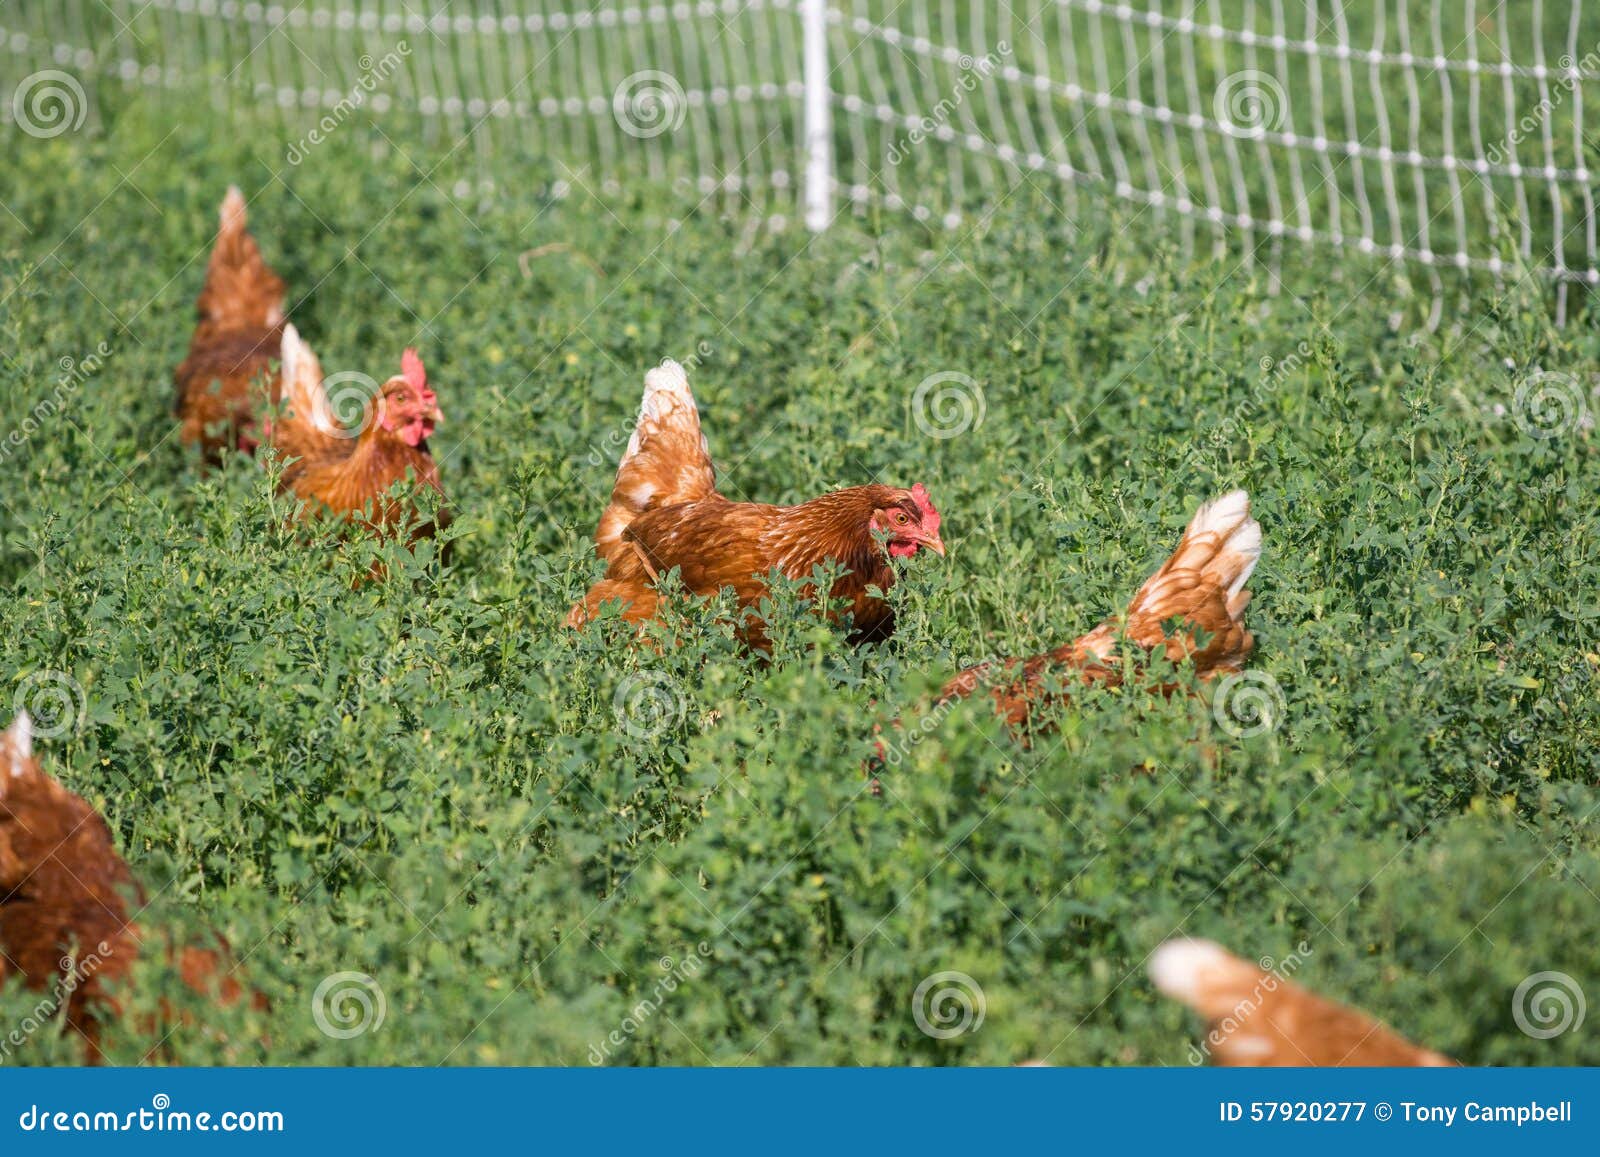 Red Sex Link Chickens Stock Image Image Of Poultry Rural